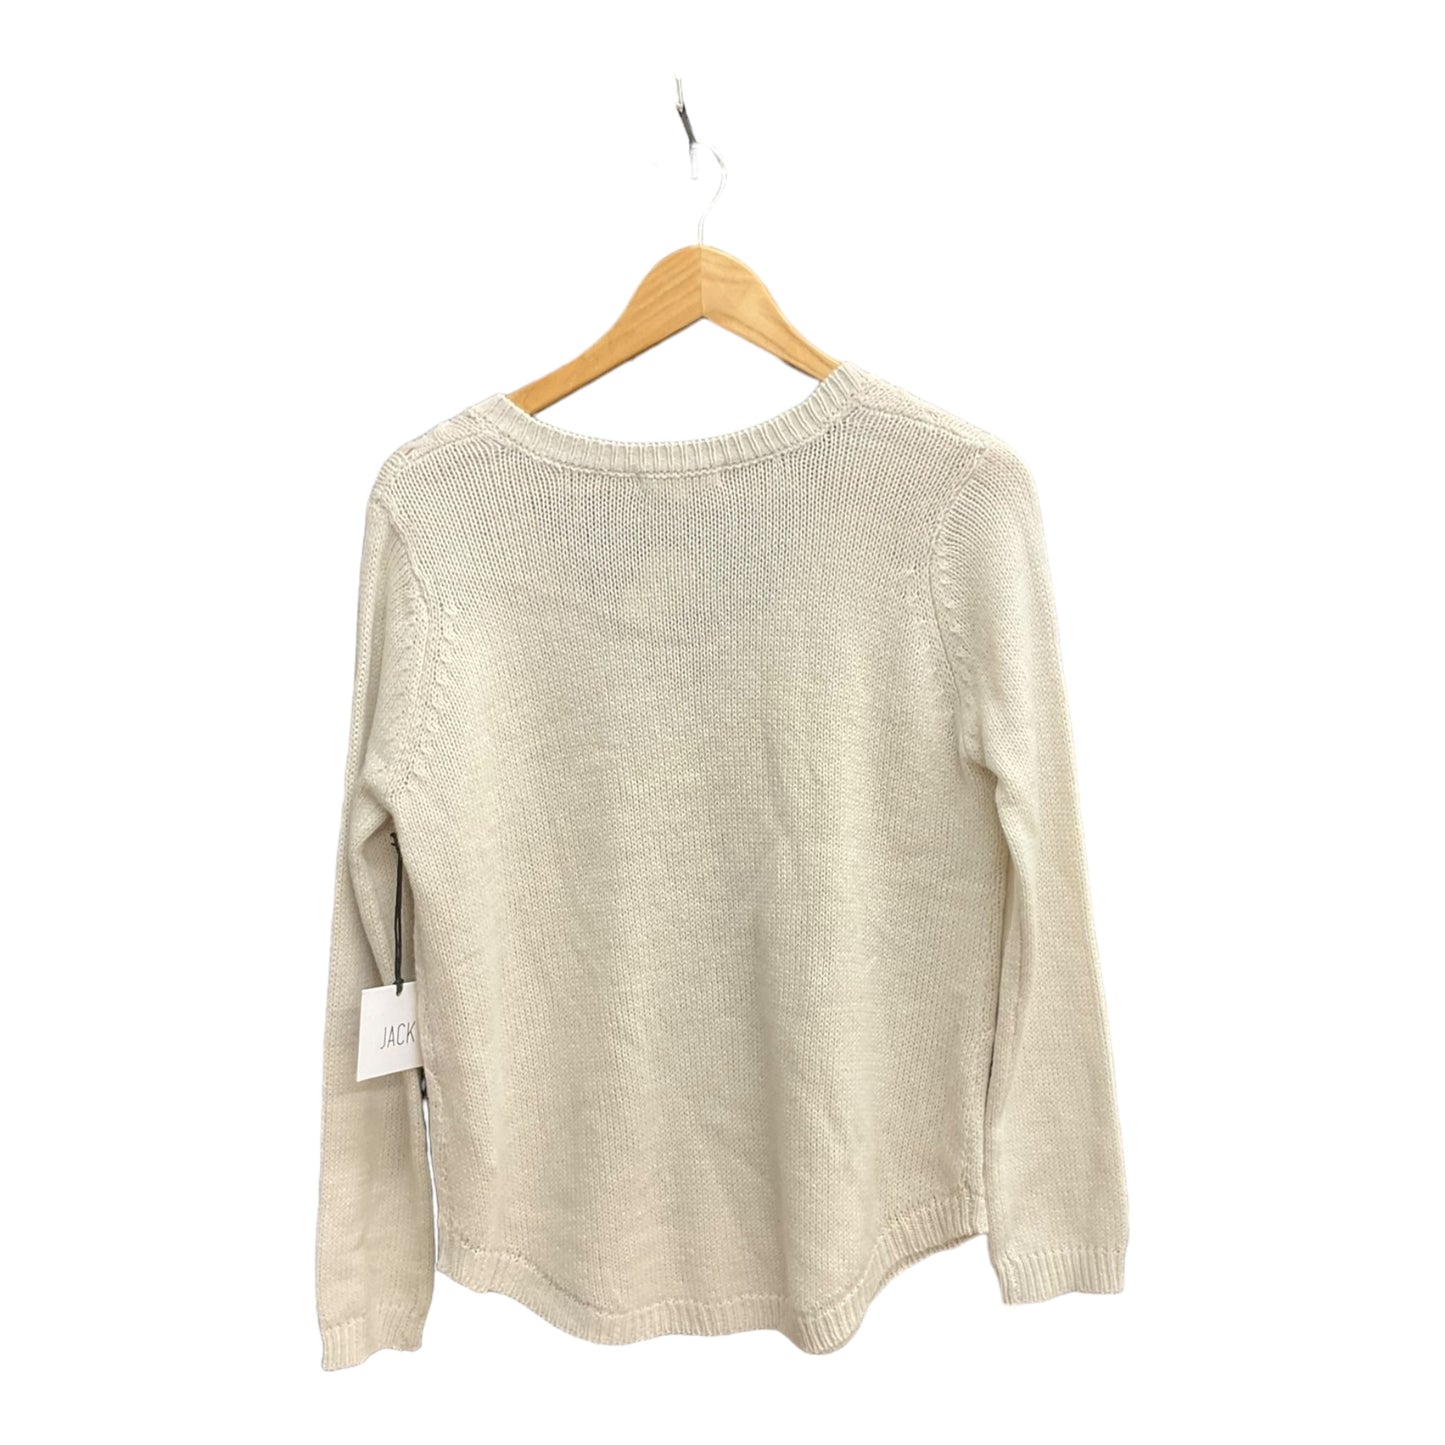 Sweater By Jack  Size: M